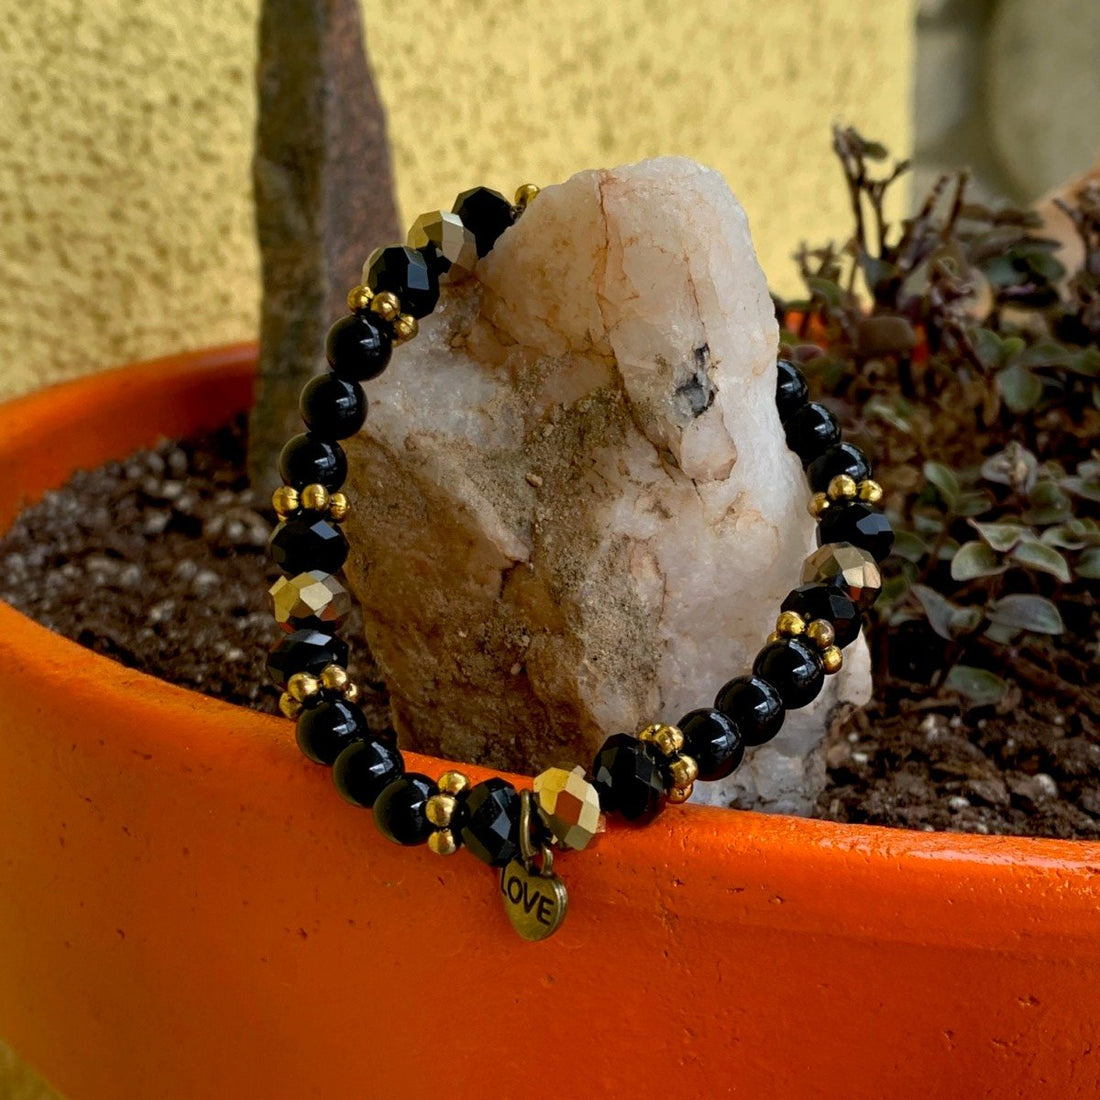 A bracelet made of Black onyx rounds with gold rondels